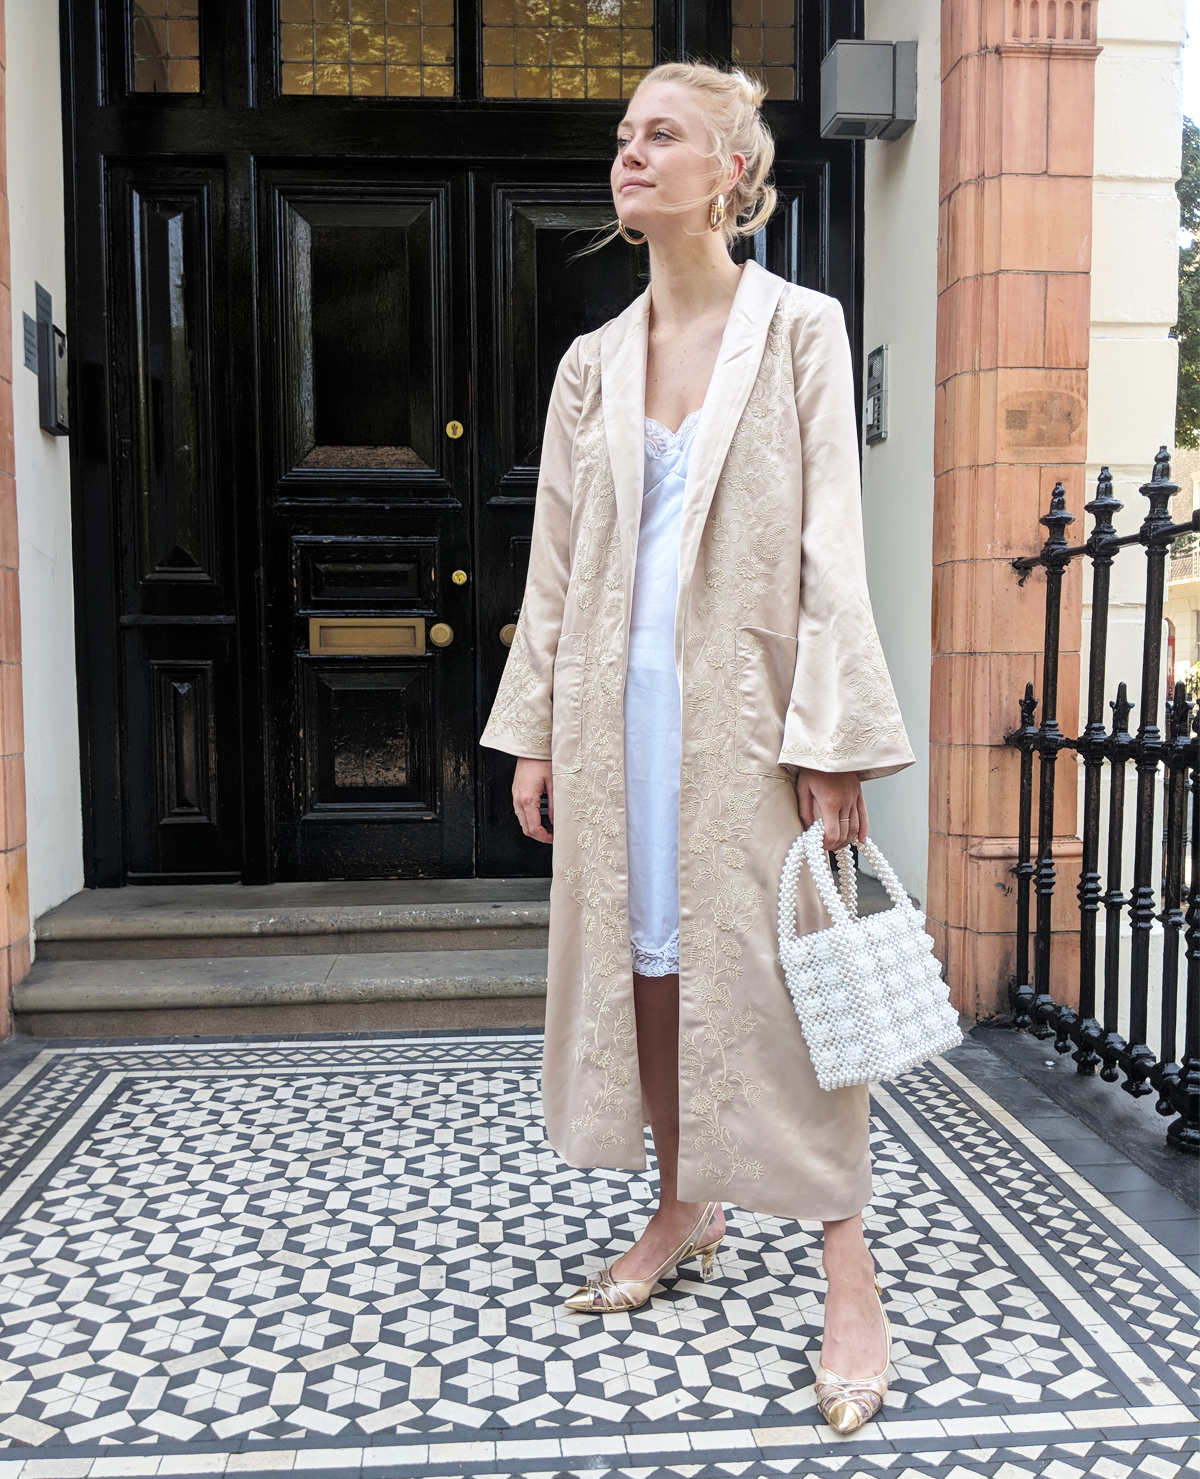 The Who What Wear Fashion Editors' Shopping List | Who What Wear UK